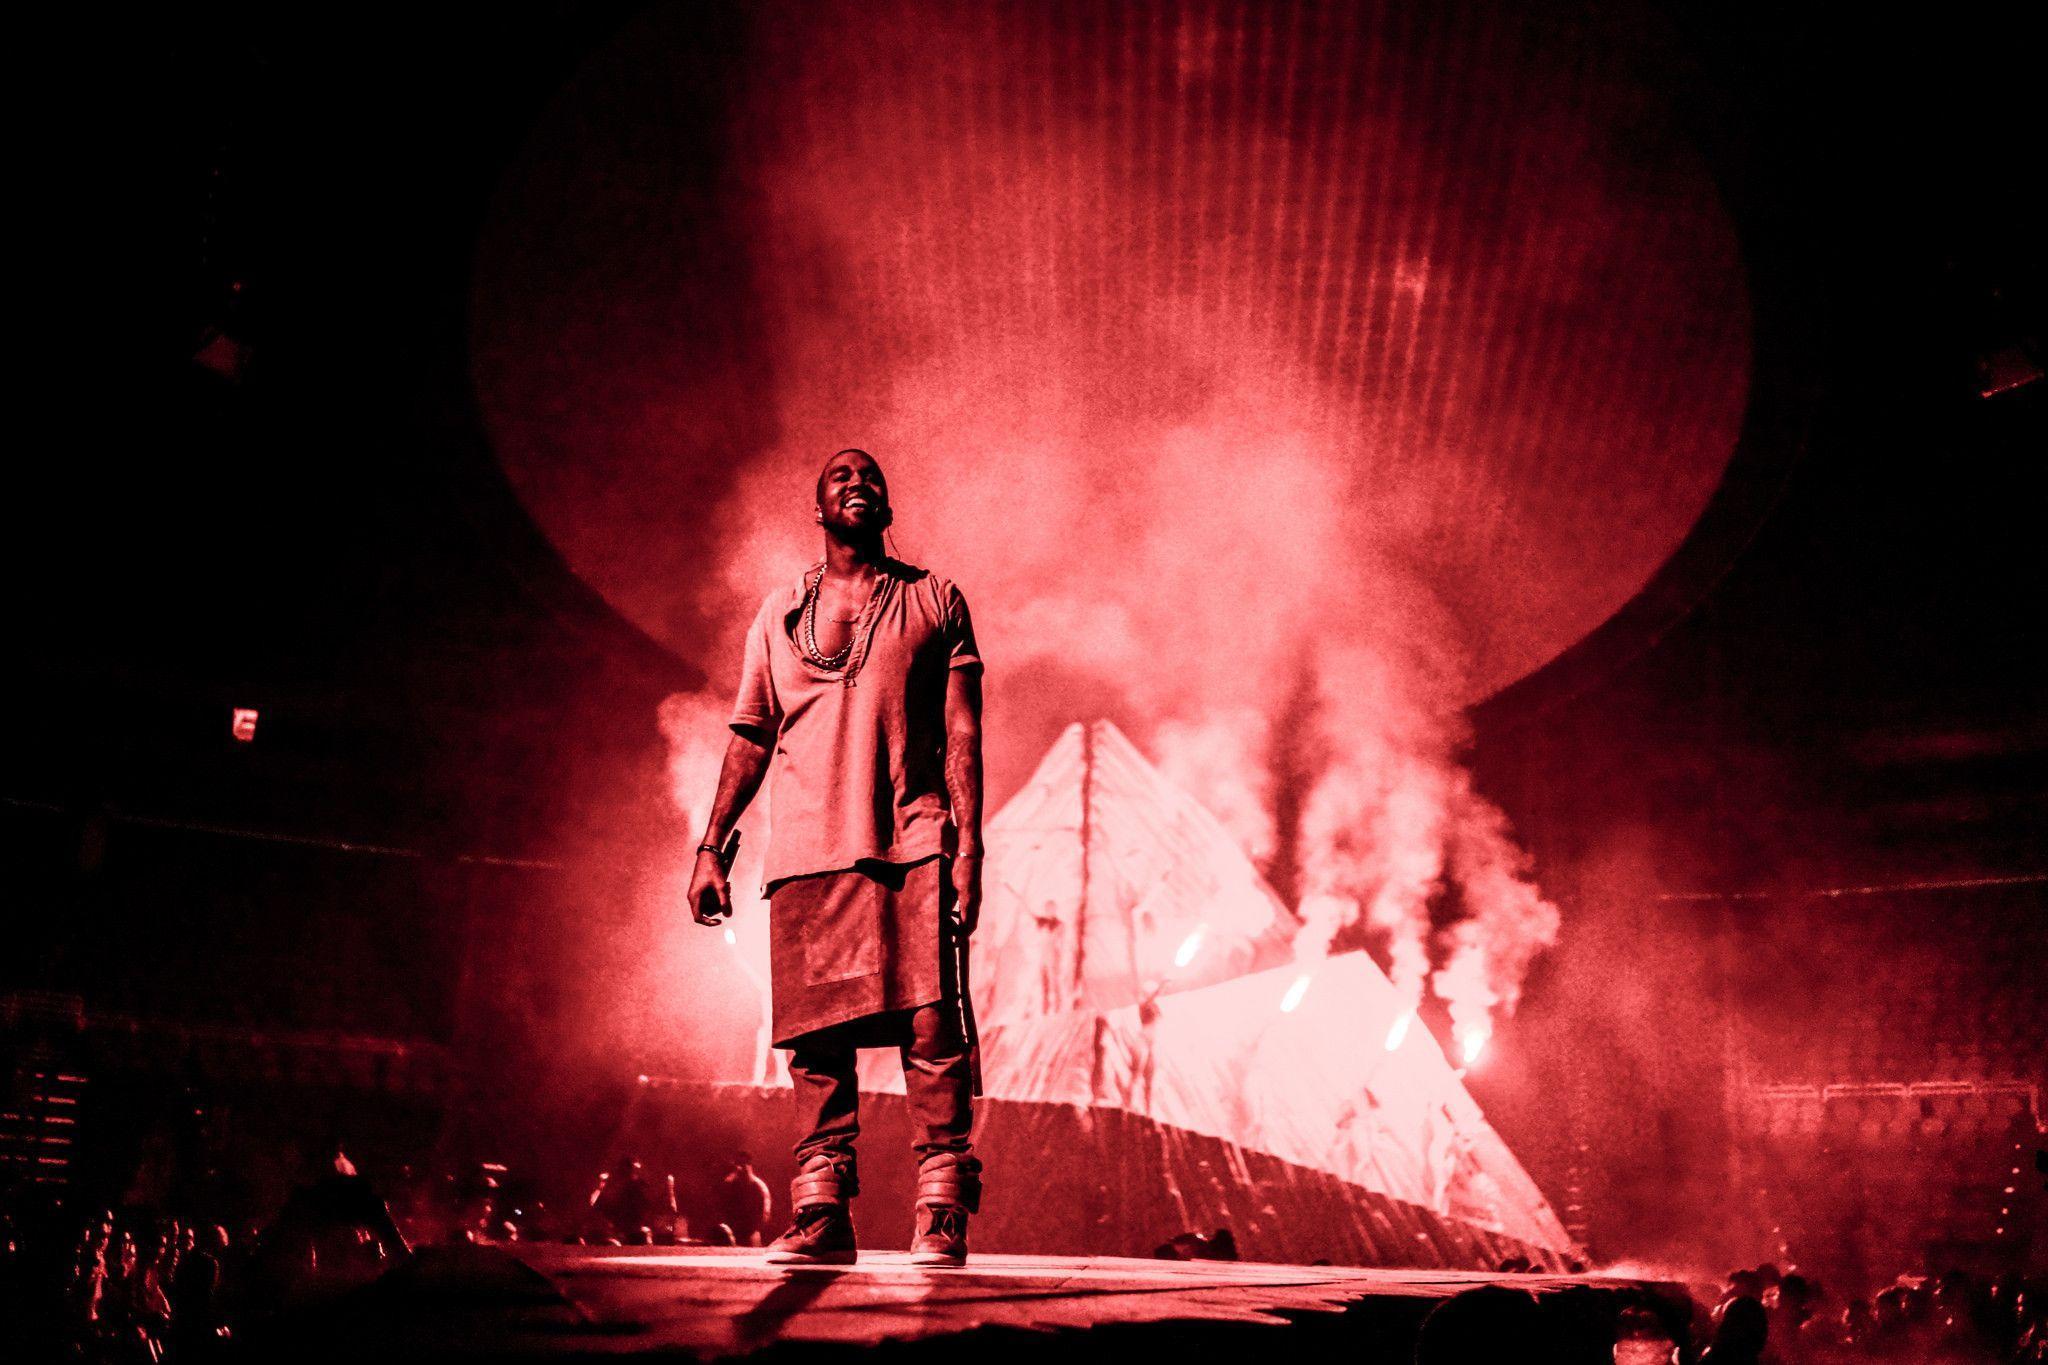 I am running for president of the United States: rapper Kanye West tweets